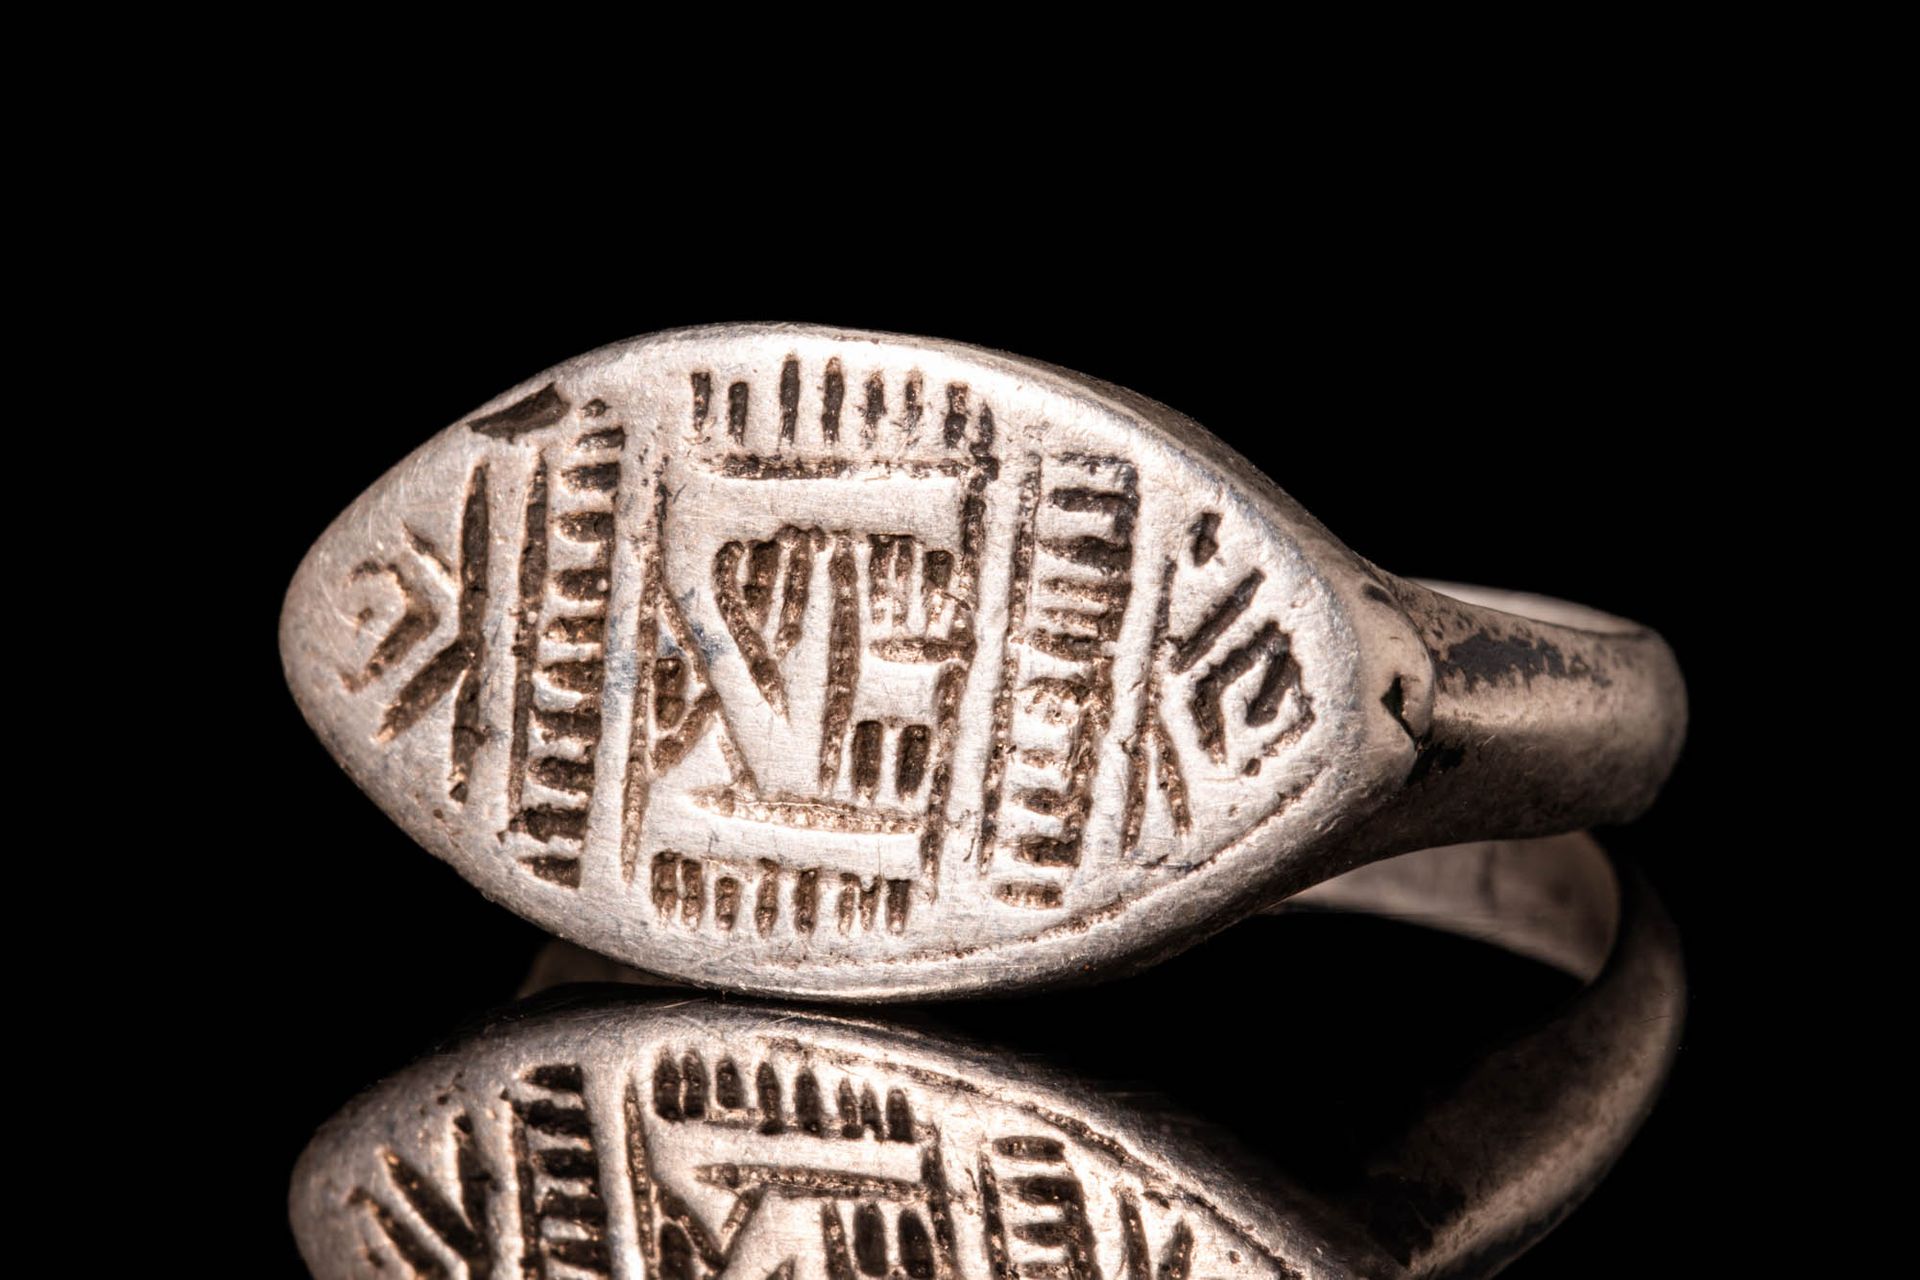 MEDIEVAL SELJUK SILVER RING WITH DECORATED BEZEL Ca. AD 1000 - 1200.
Ein mittela&hellip;